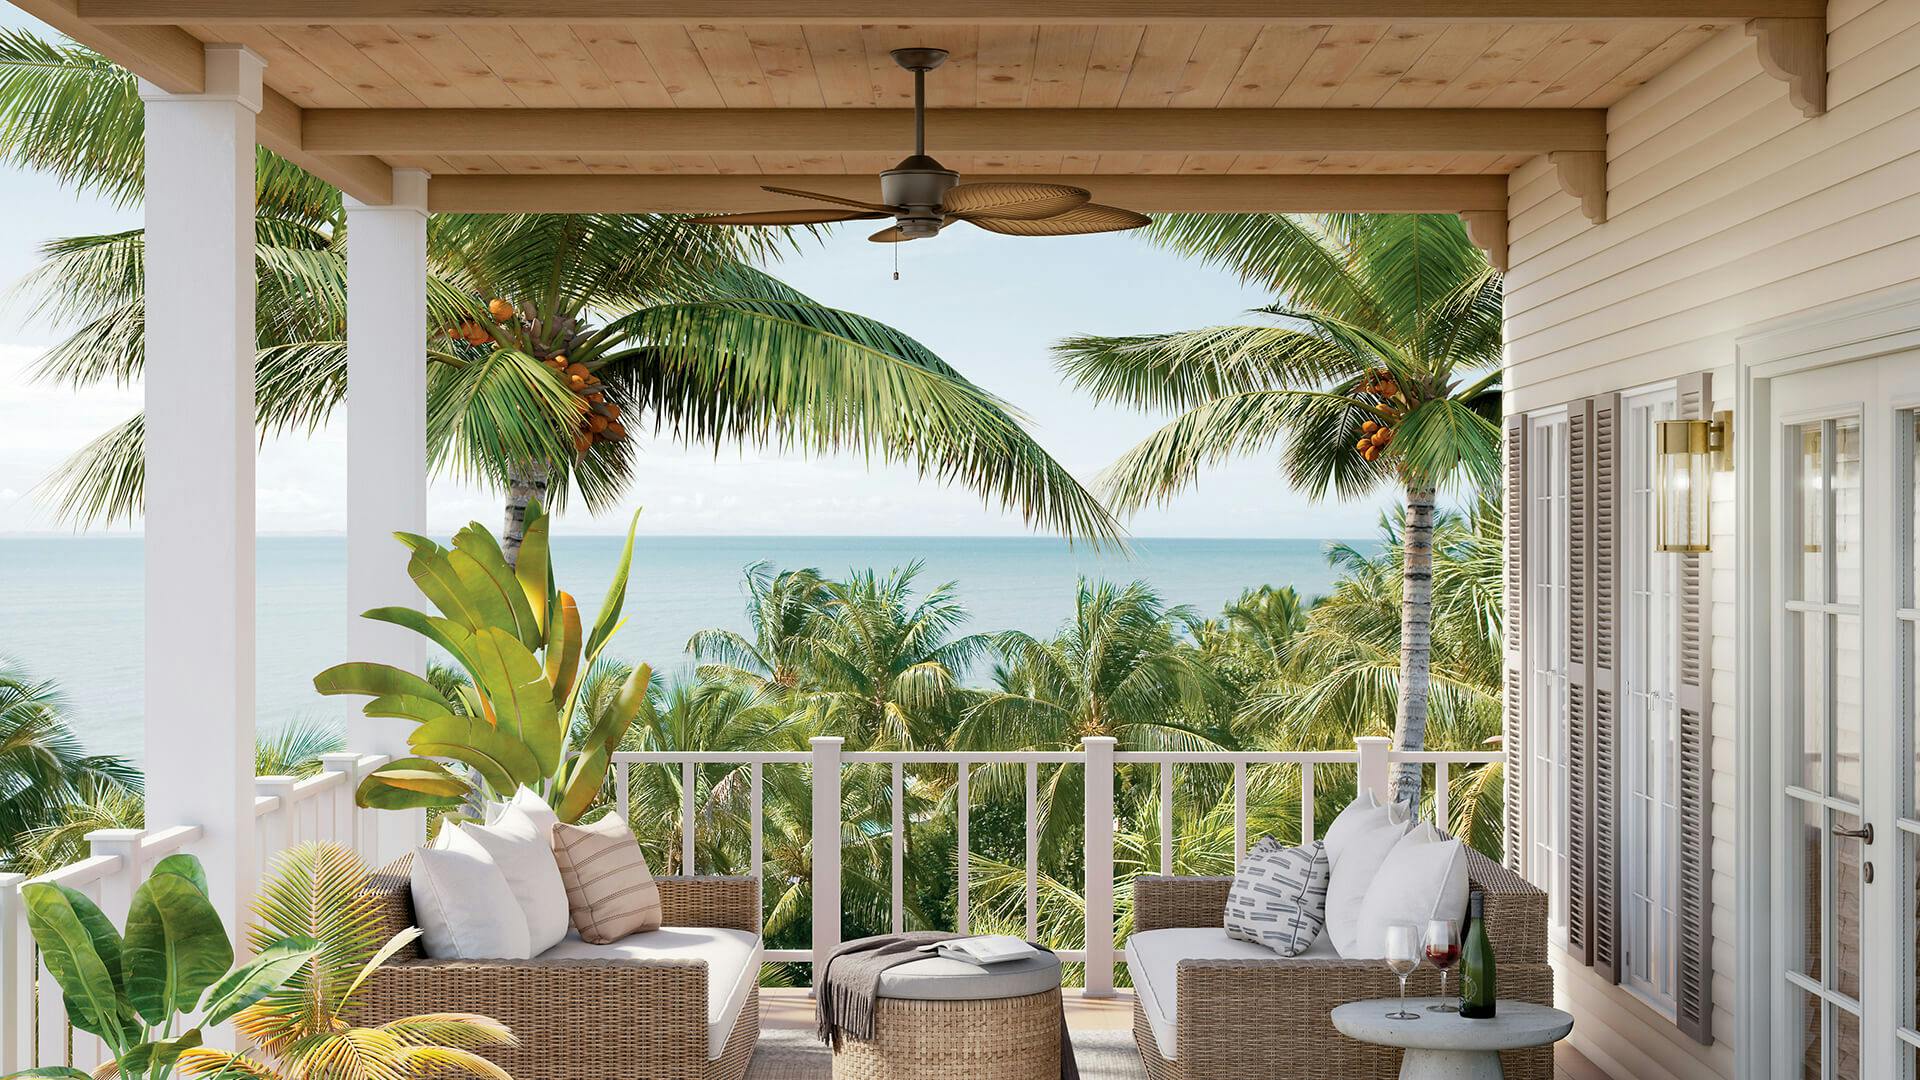 Costal porch with palm trees and ocean in the backdrop featuring a Nani ceiling fan